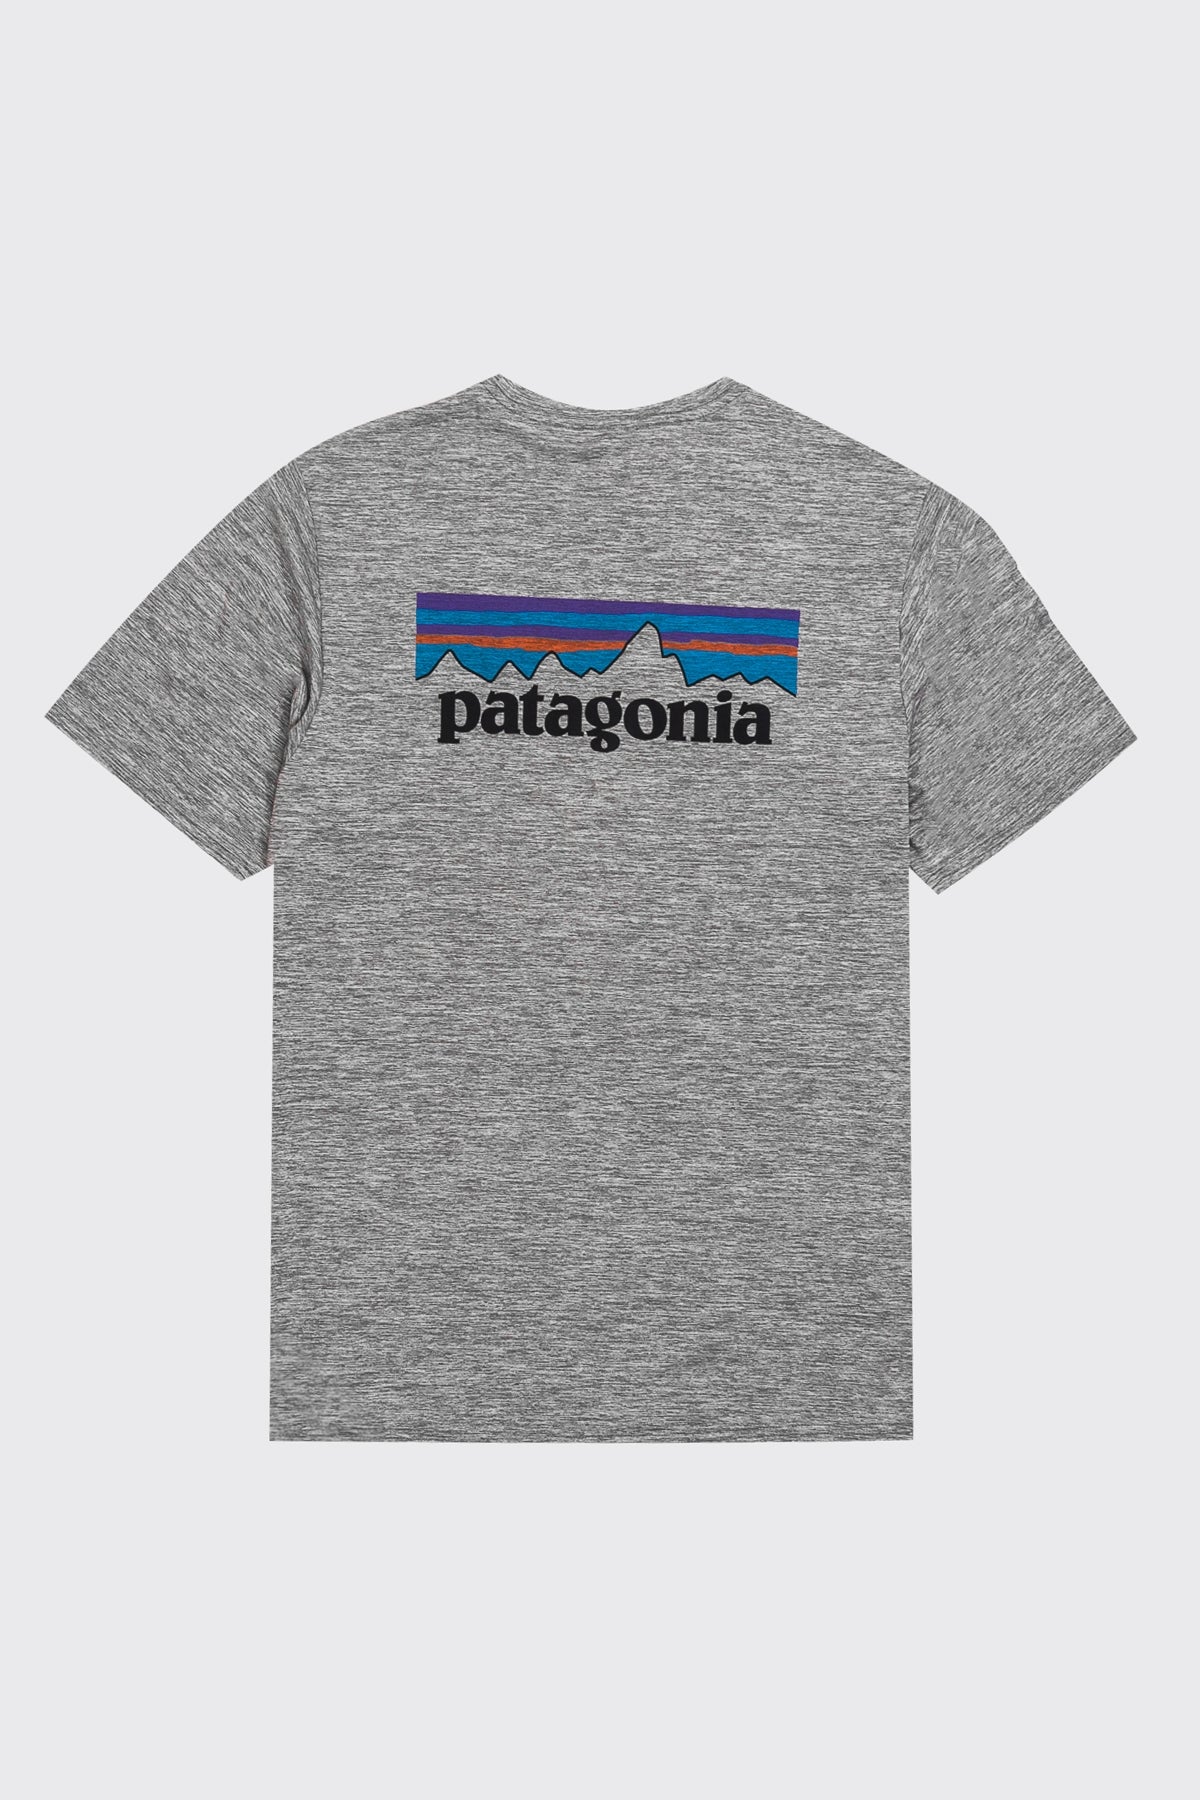 patagonia - Capilene cool Daily graphic shirt